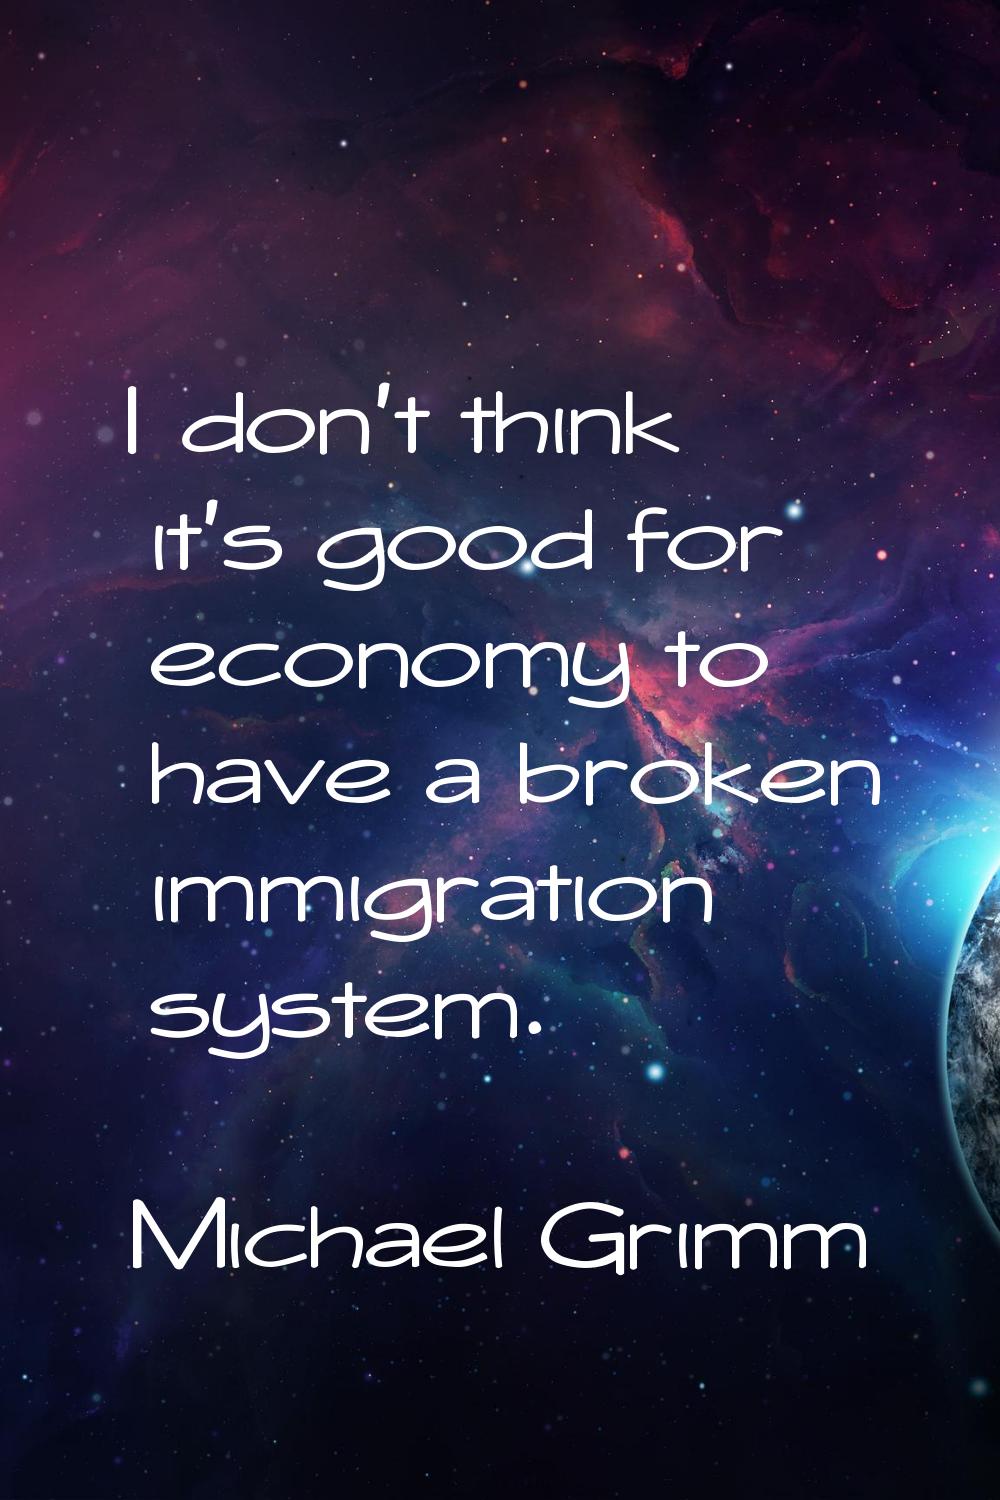 I don't think it's good for economy to have a broken immigration system.